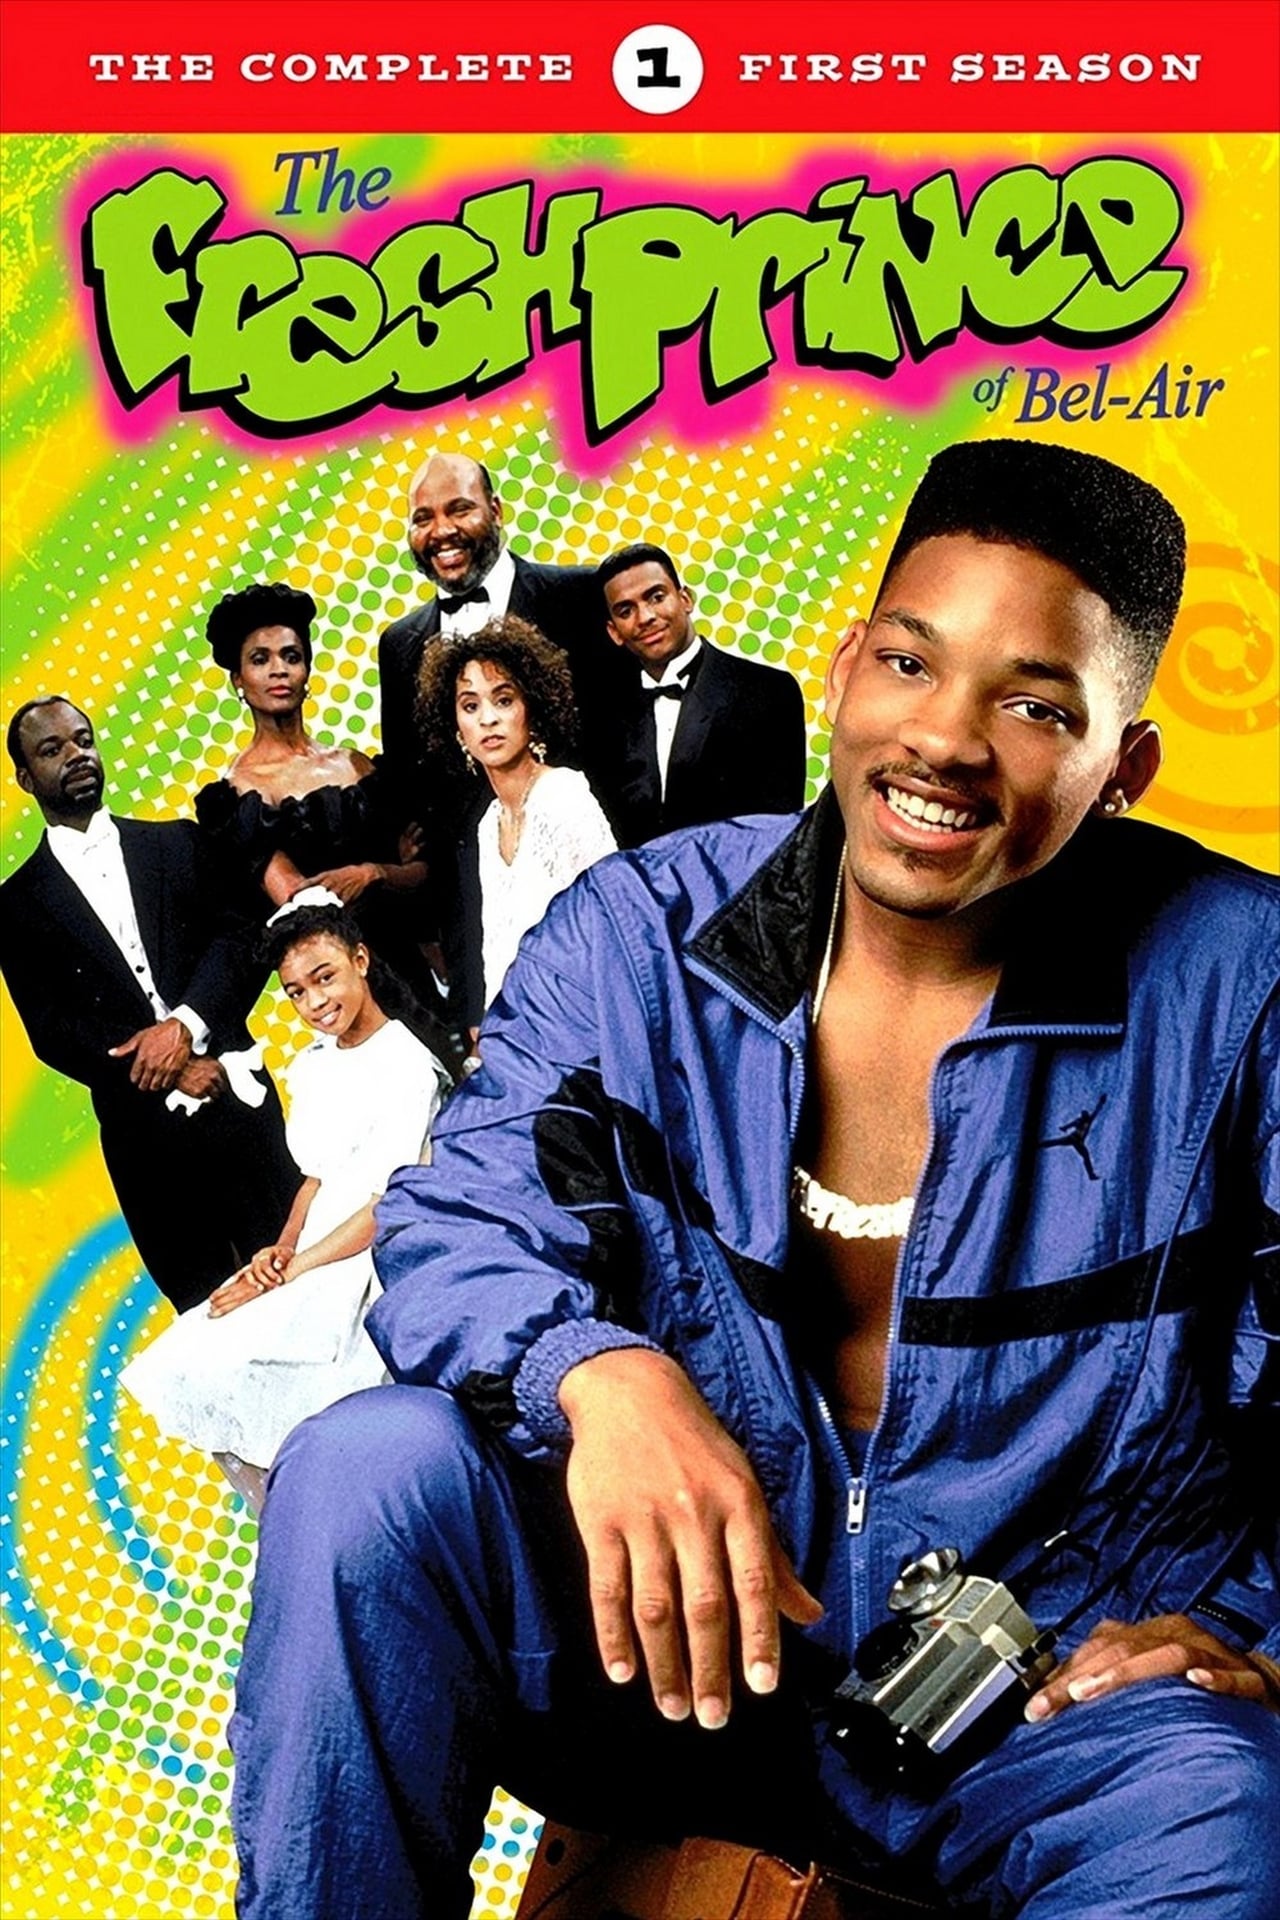 The Fresh Prince Of Bel-Air Season 1 - Watch full episodes free online - What Can I Watch Fresh Prince Of Bel Air On